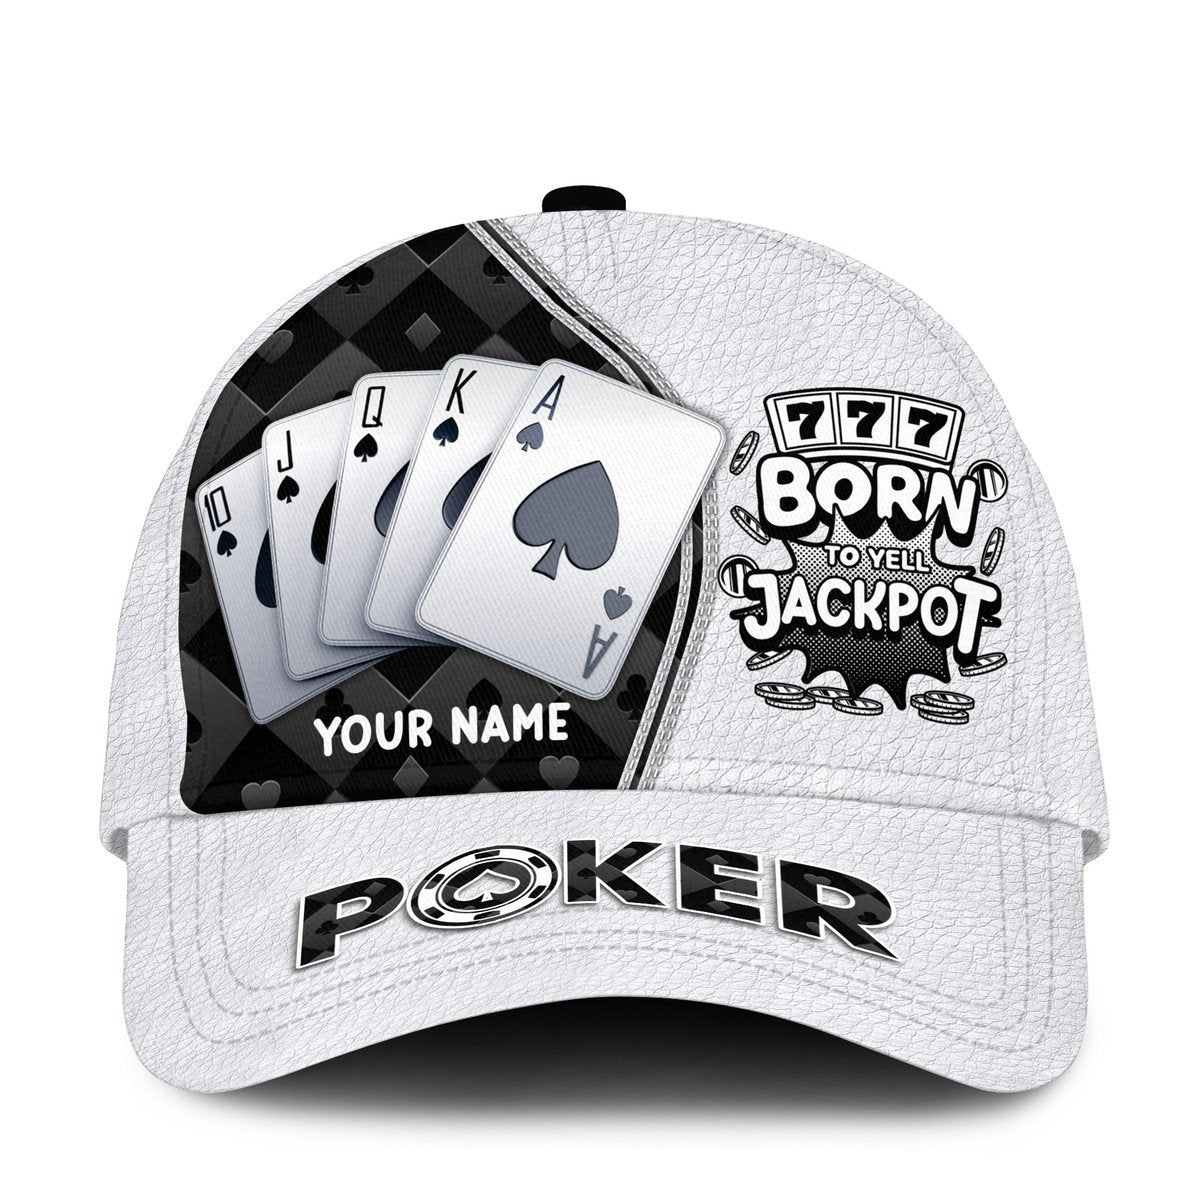 Personalized Name Poker Jackpot Classic Cap/ Born To Yell Jackpot Funny Cap/ Poker Hat